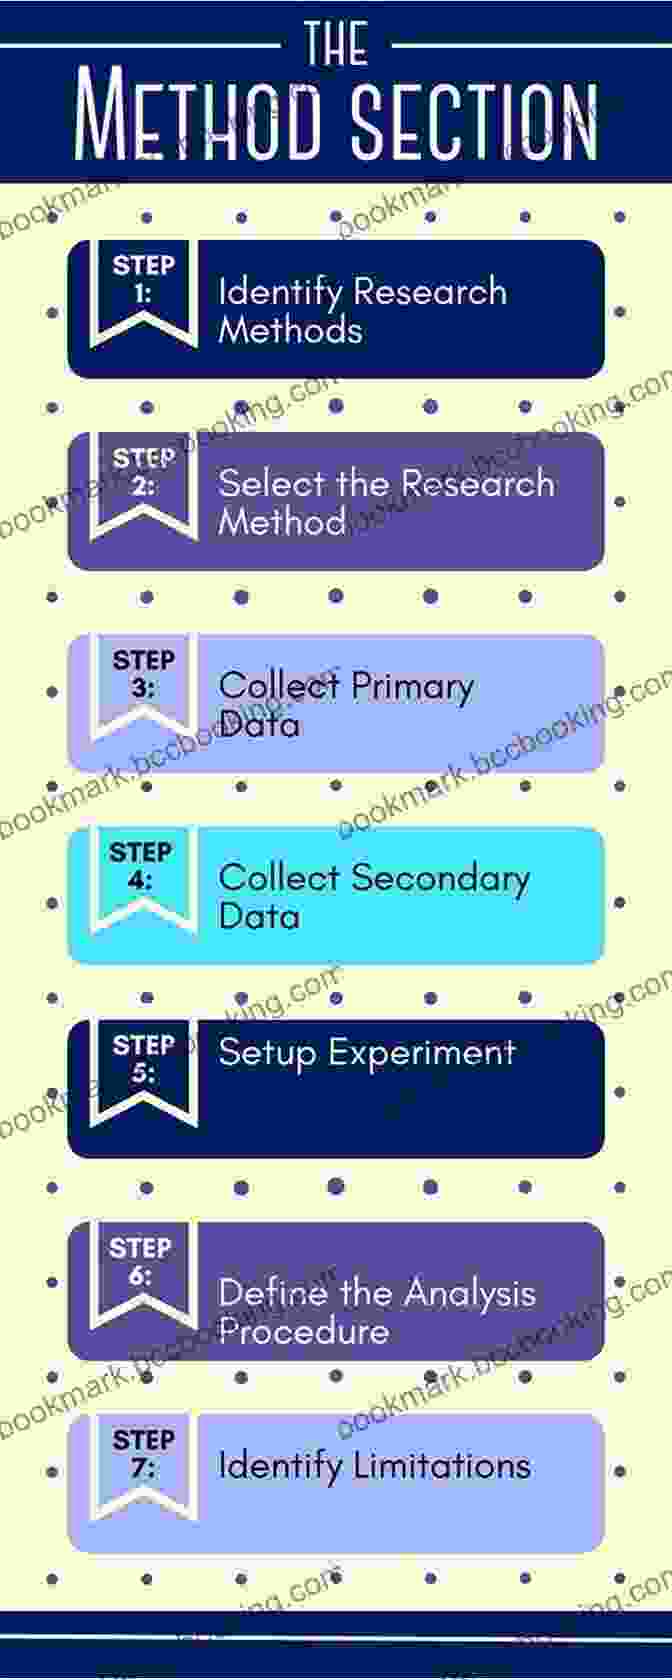 Image Of A Clear And Concise Scientific Writing Methods And Results Section. Master S/Ph D Thesis: A Step By Step Writing Guide (Scientific Writing For Beginners)